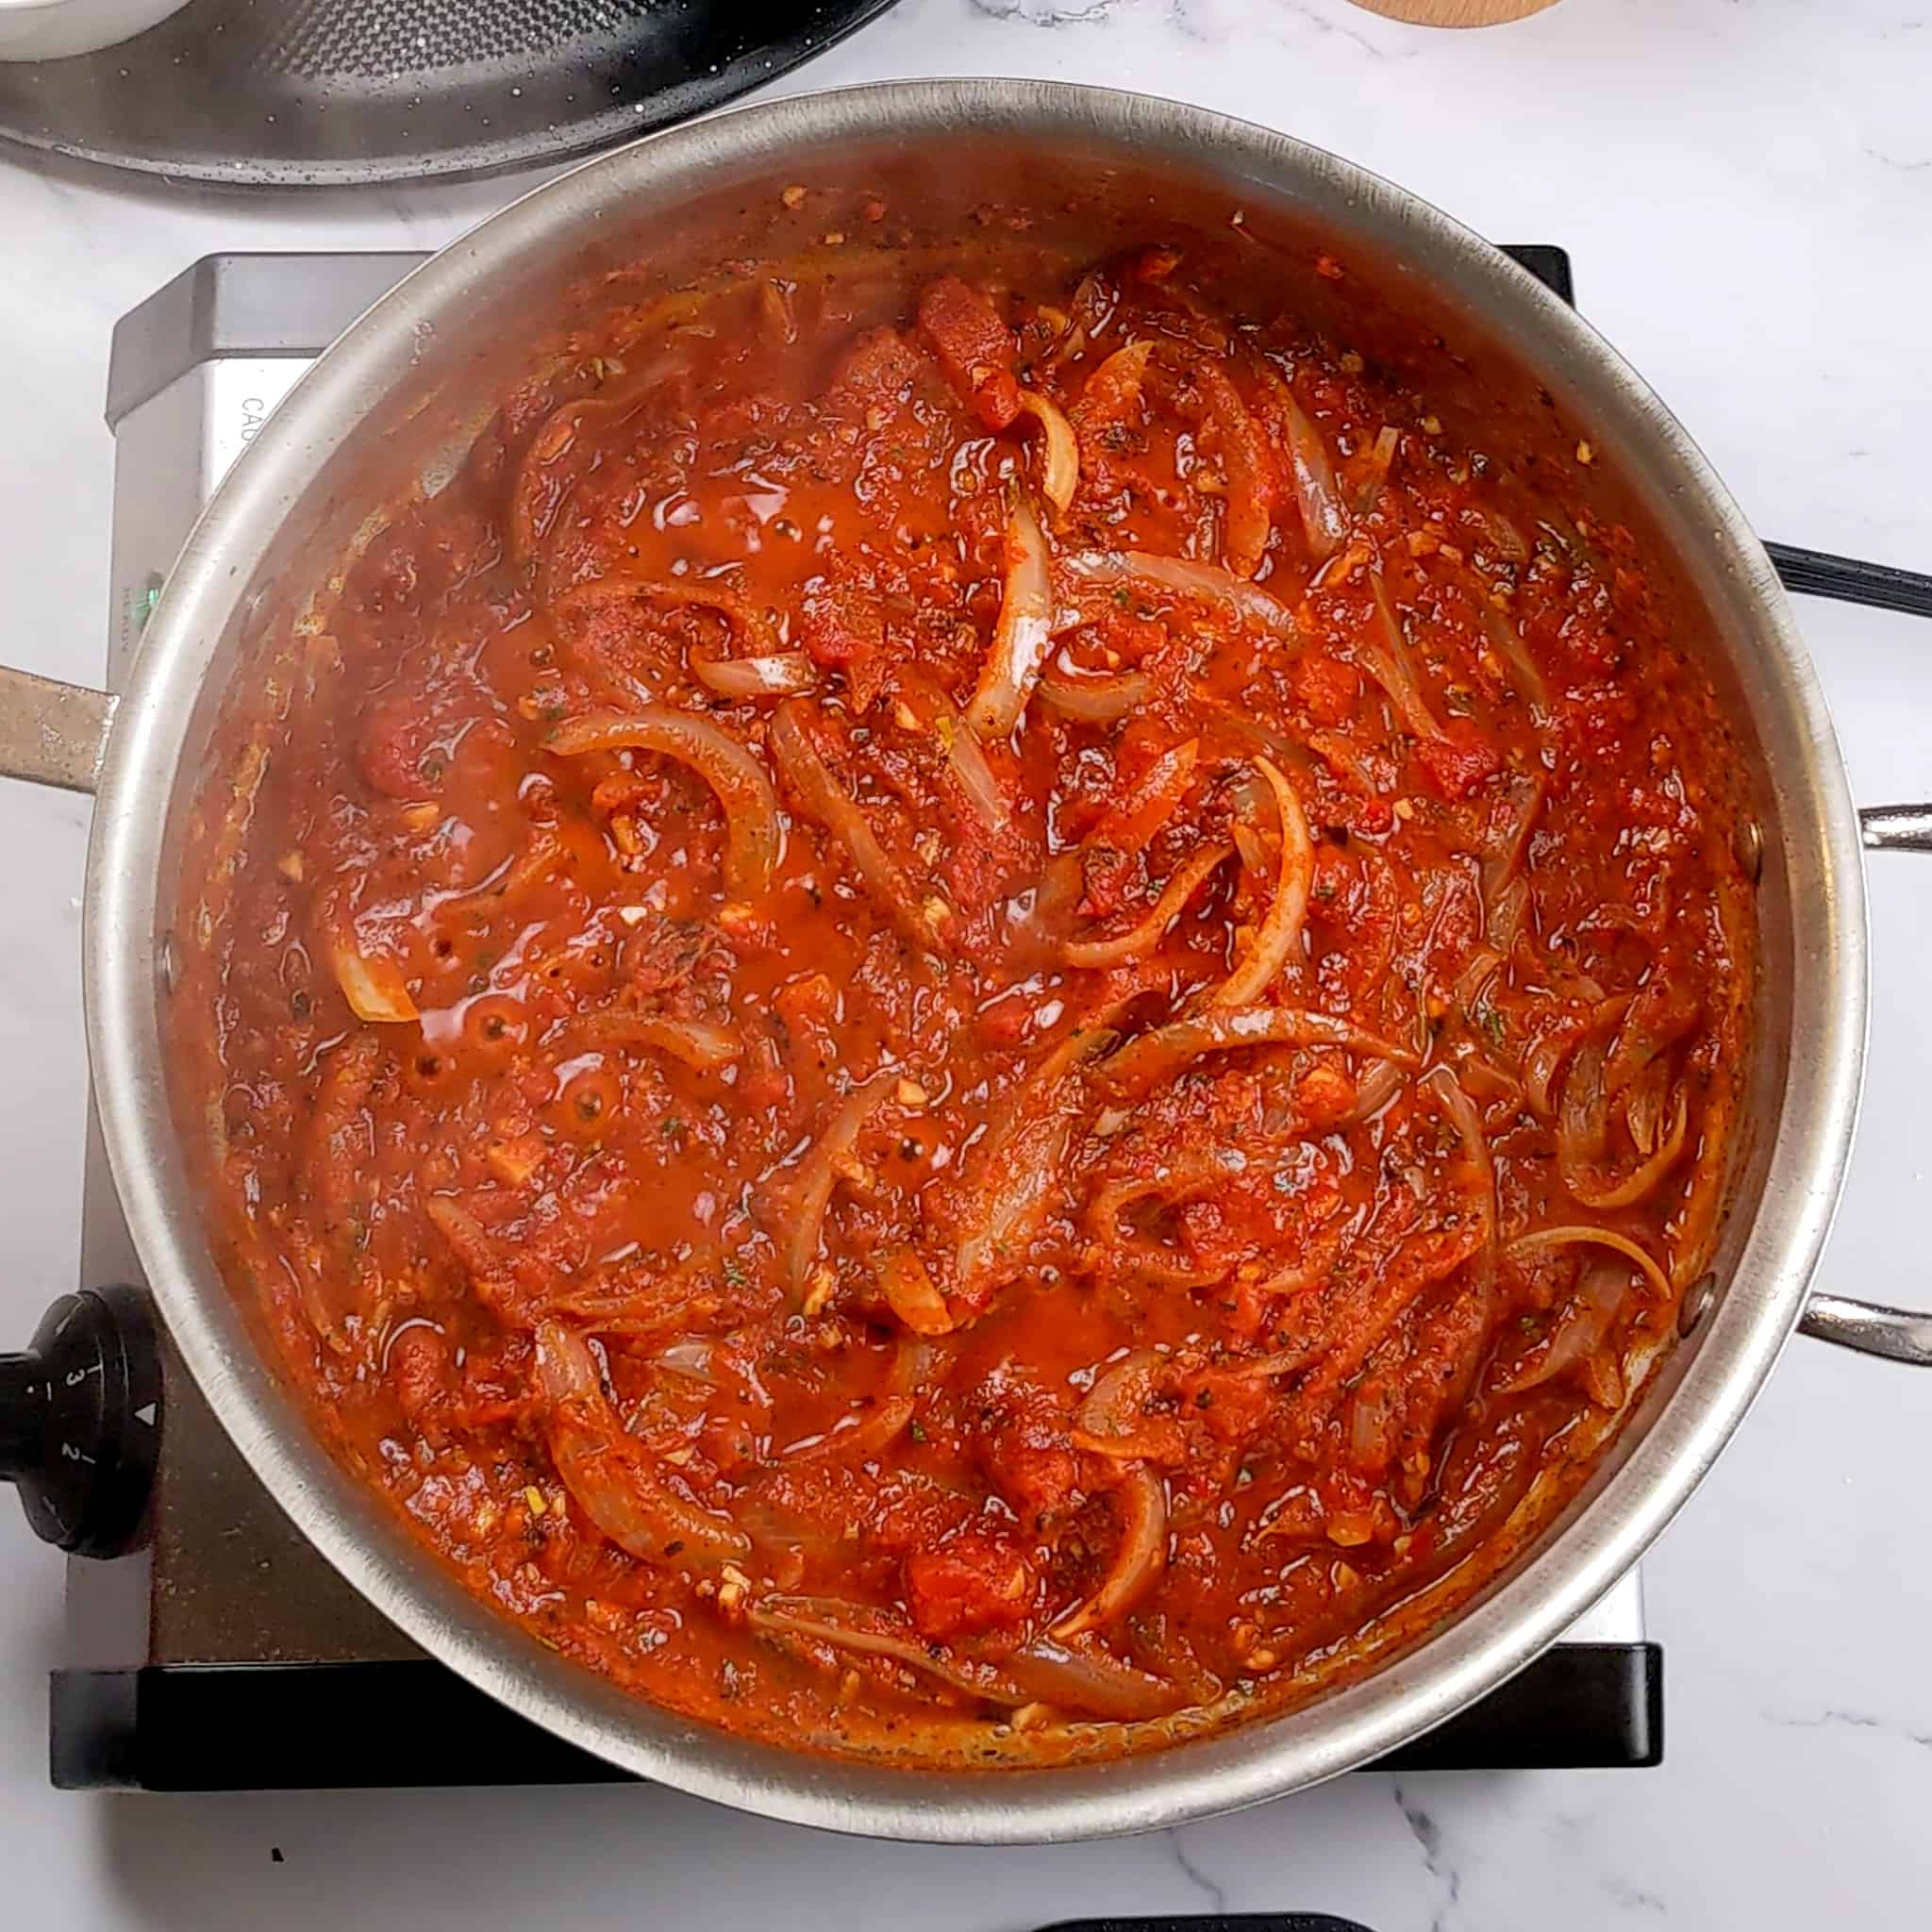 sauted onions with tomato sauce, harissa paste and seasoning in an all-clad stainless steel saute pan